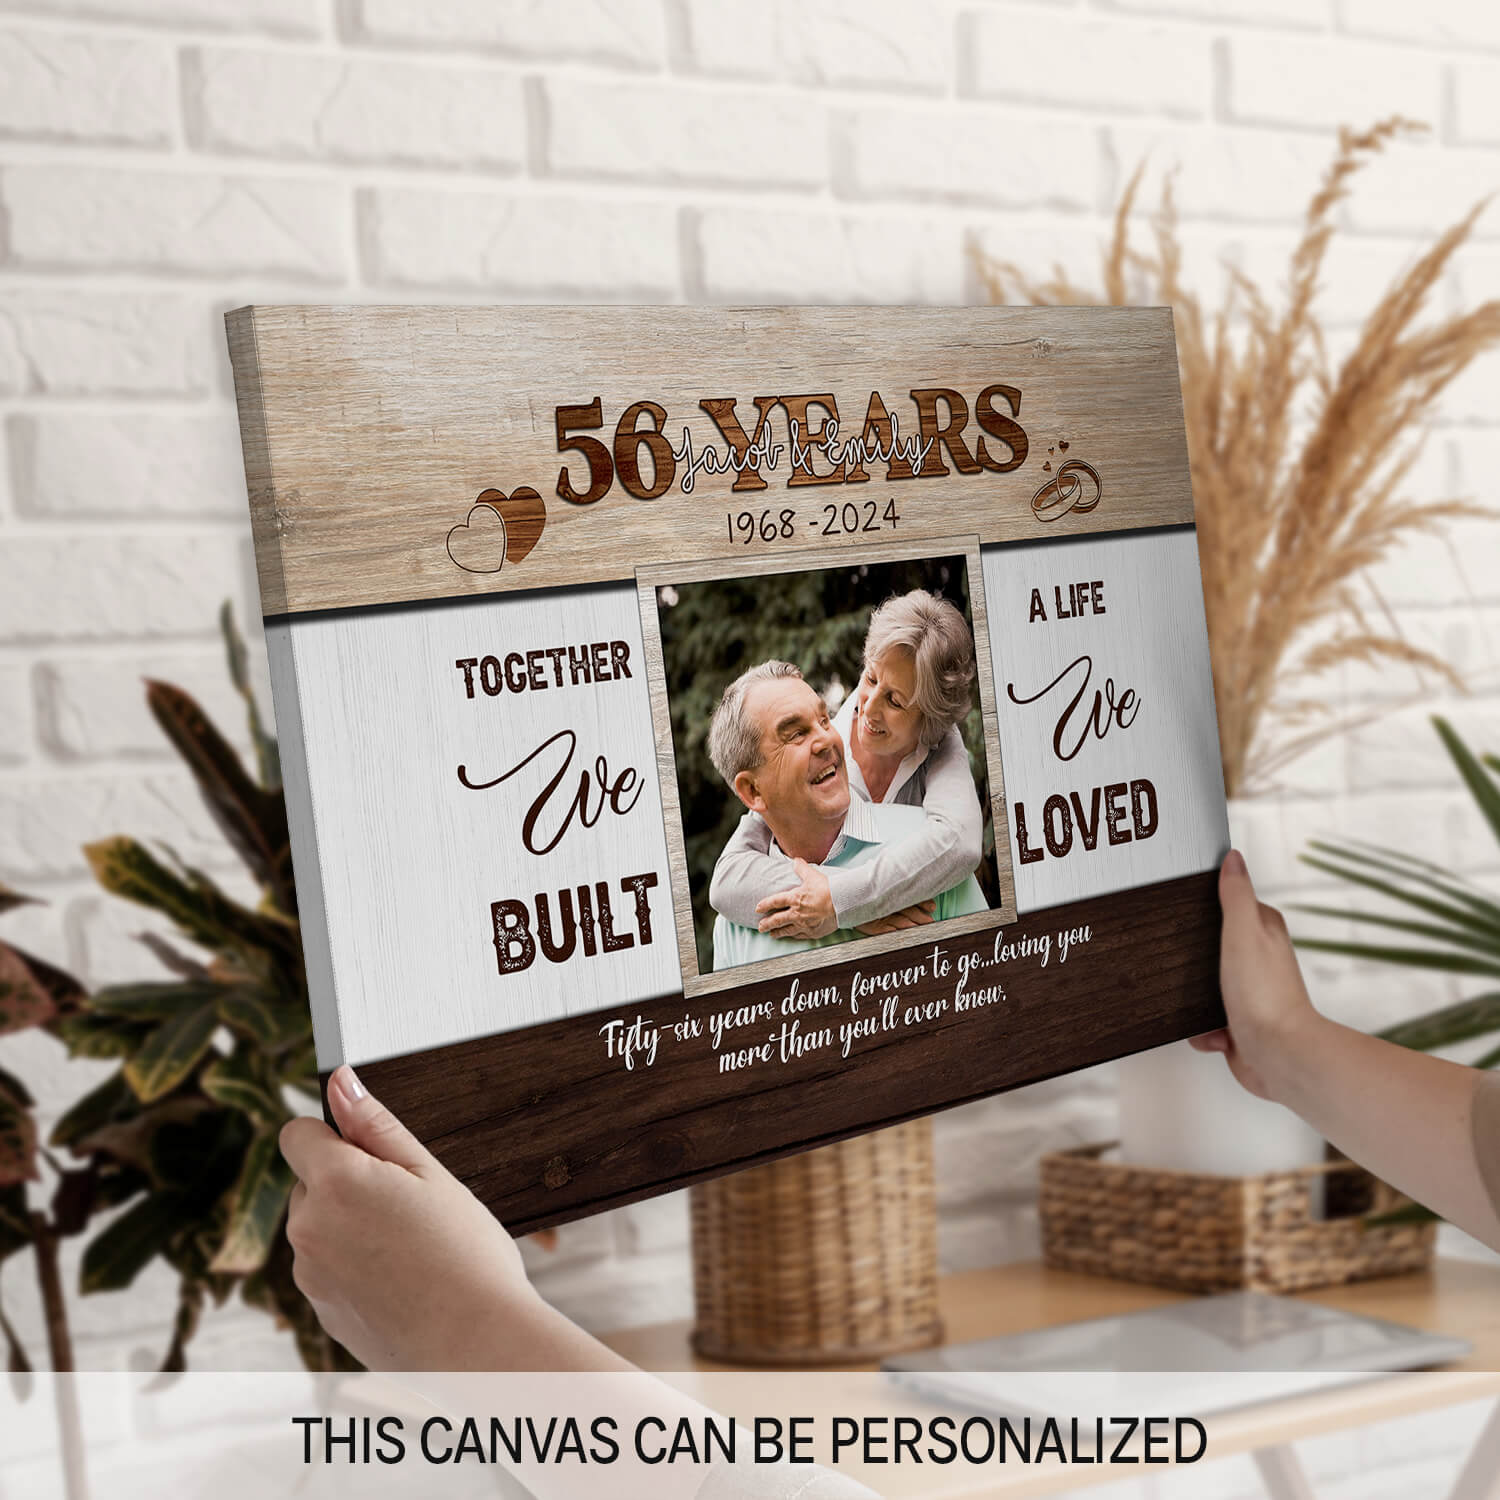 Fifty-six Years Forever To Go - Personalized 56 Year Anniversary gift For Husband or Wife - Custom Canvas Print - MyMindfulGifts